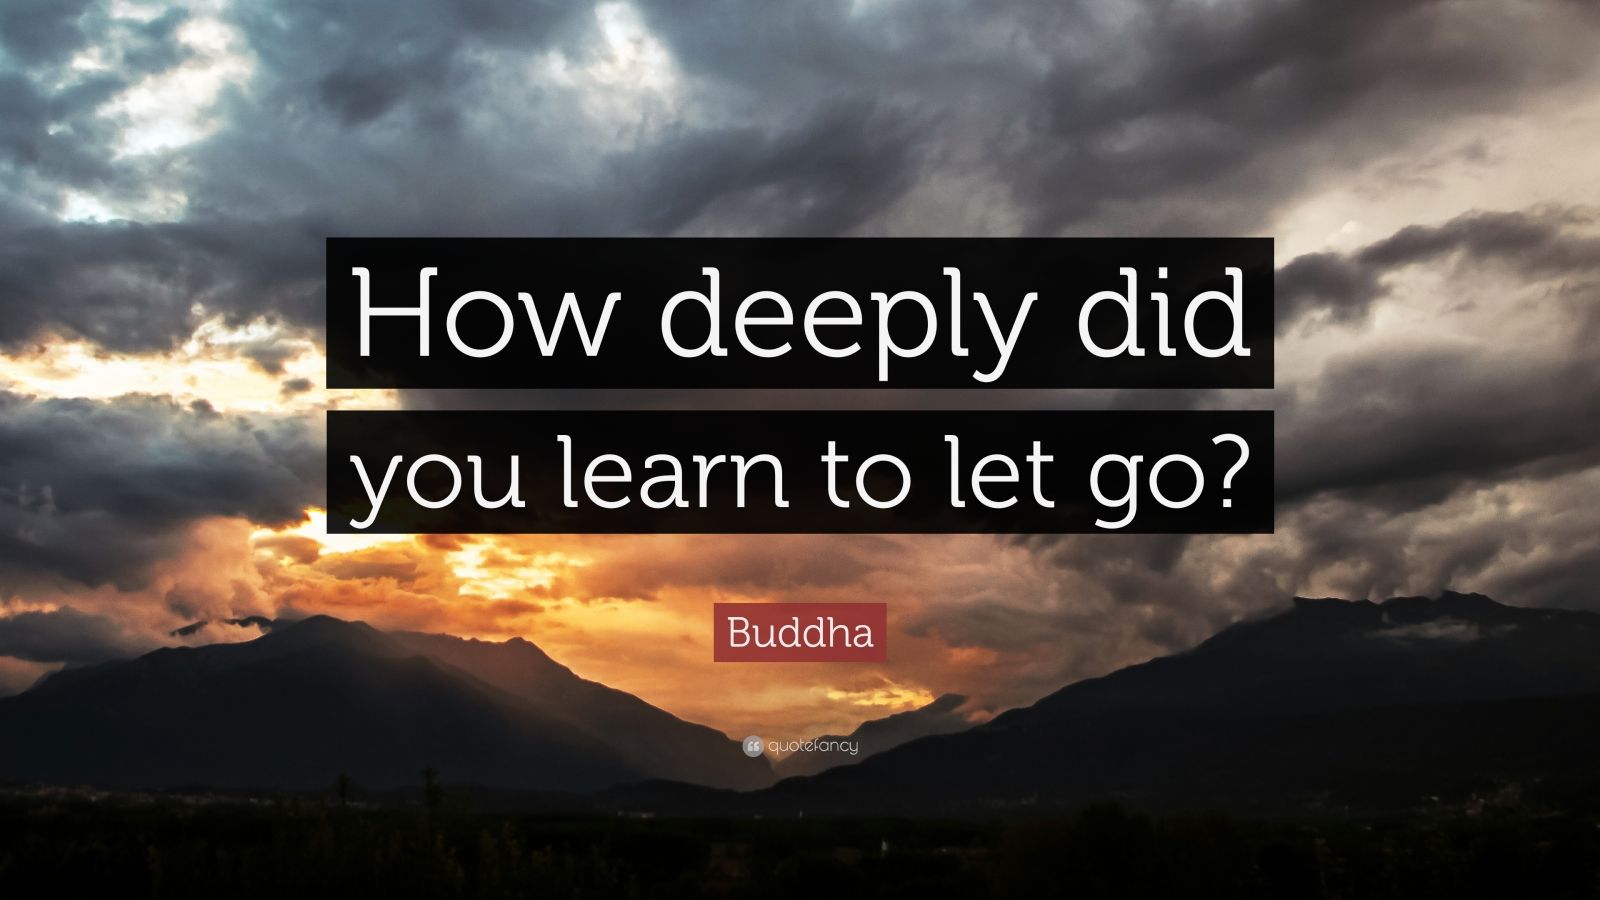 Buddha Quote: “How deeply did you learn to let go?”